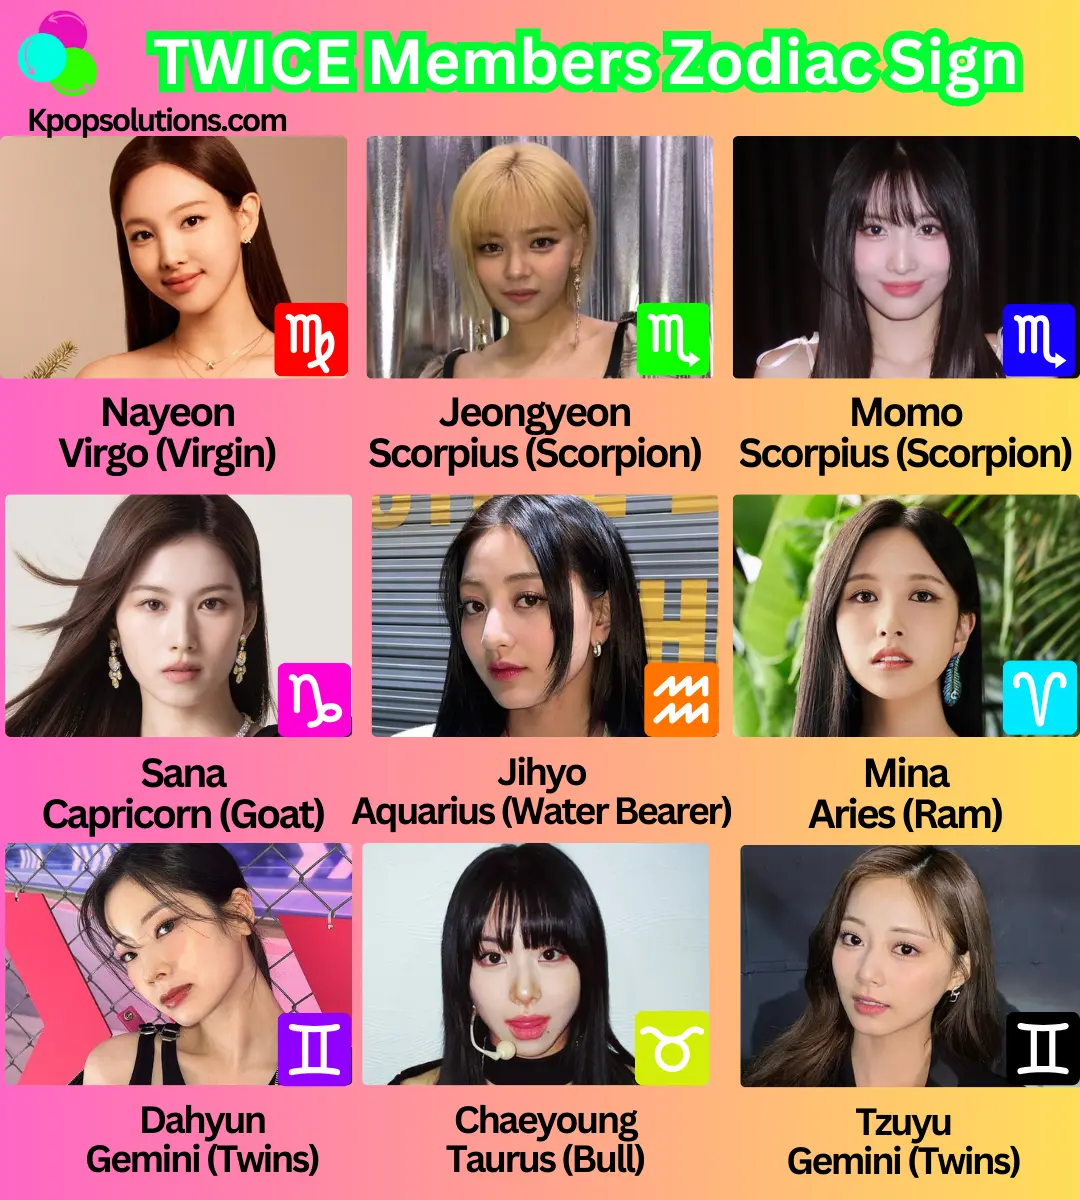 TWICE members Zodiac sign for Nayeon, Jeongyeon, Momo, Sana, Jihyo, Mina, Dahyun, Chaeyoung, and Tzuyu, with its meaning and symbol in left to right order.